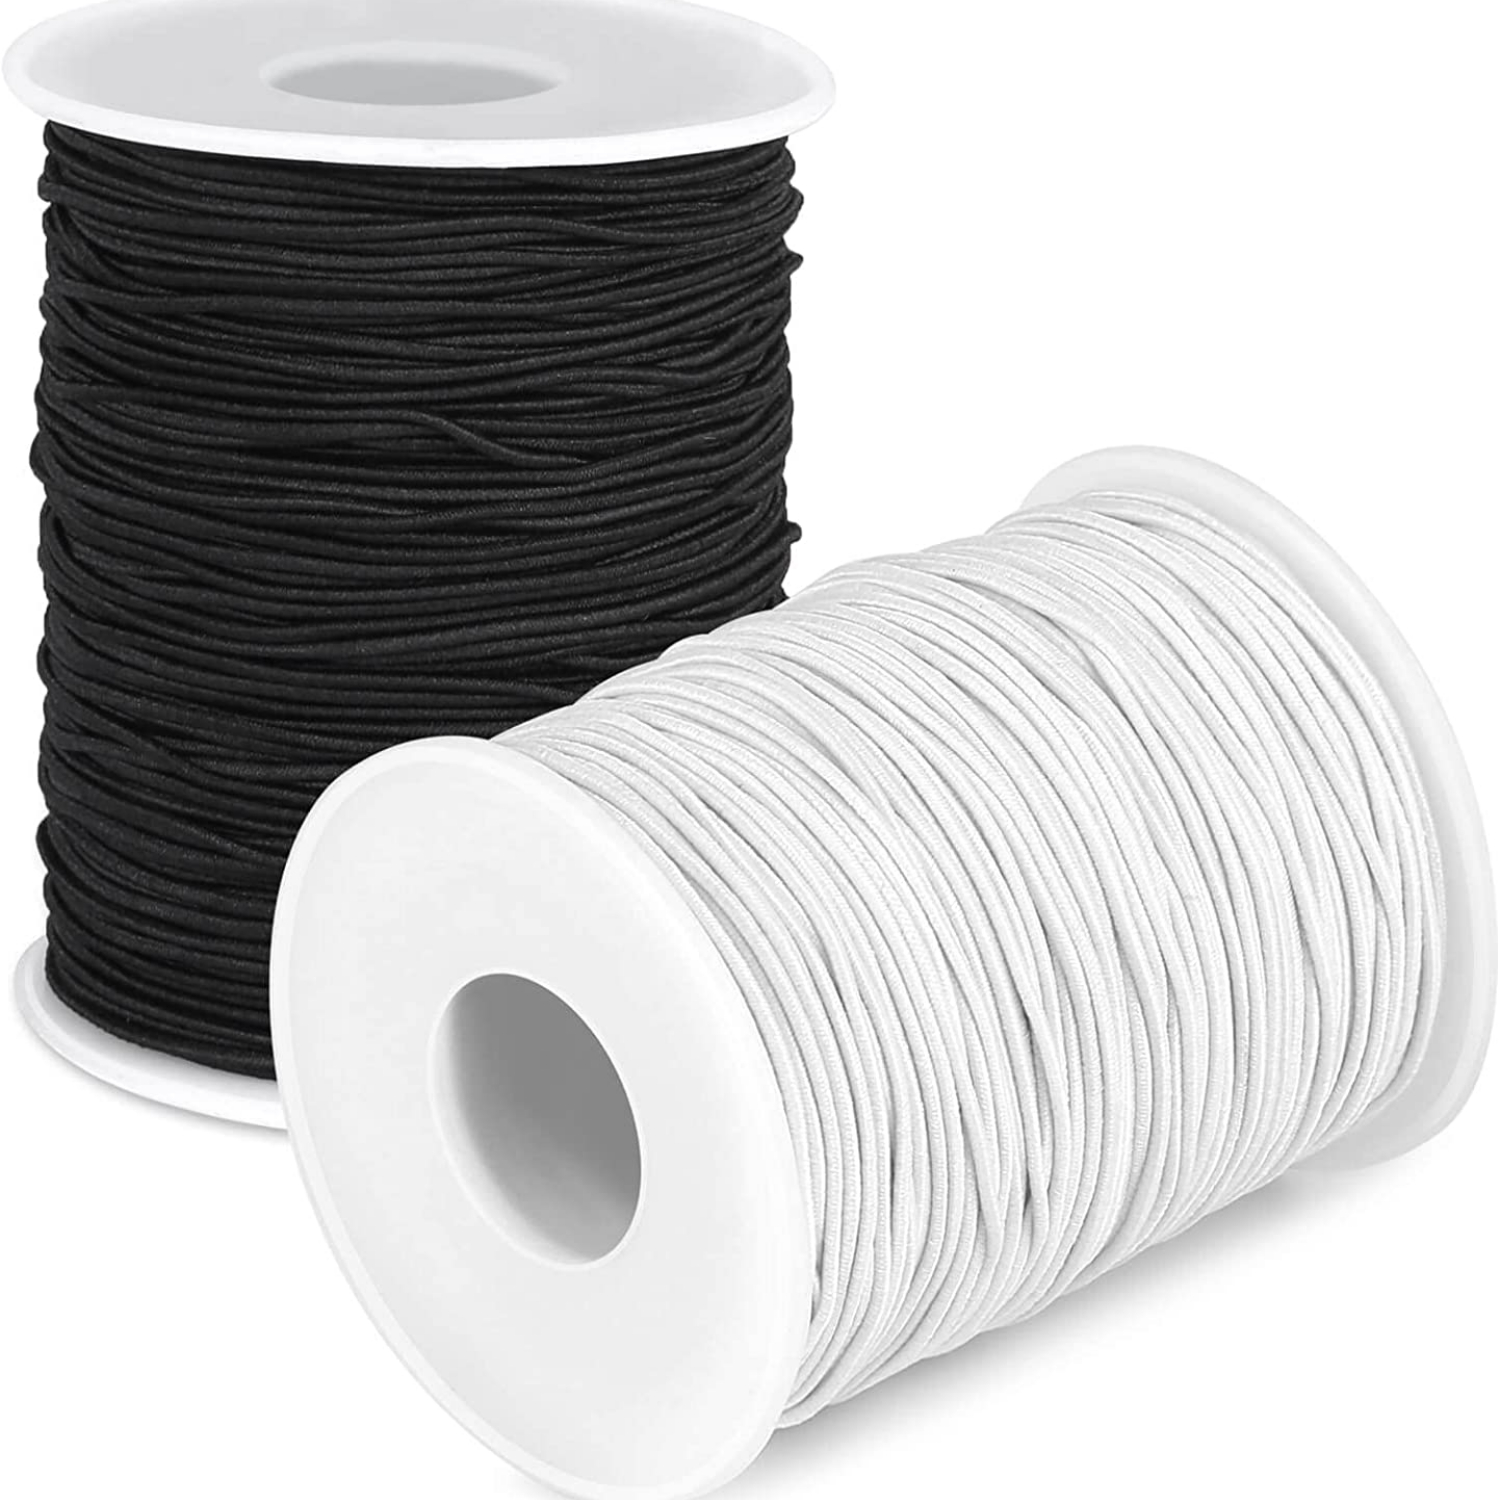 Elastic Cord Stretchy String 2mm 49 Yards for Crafts, Jewelry